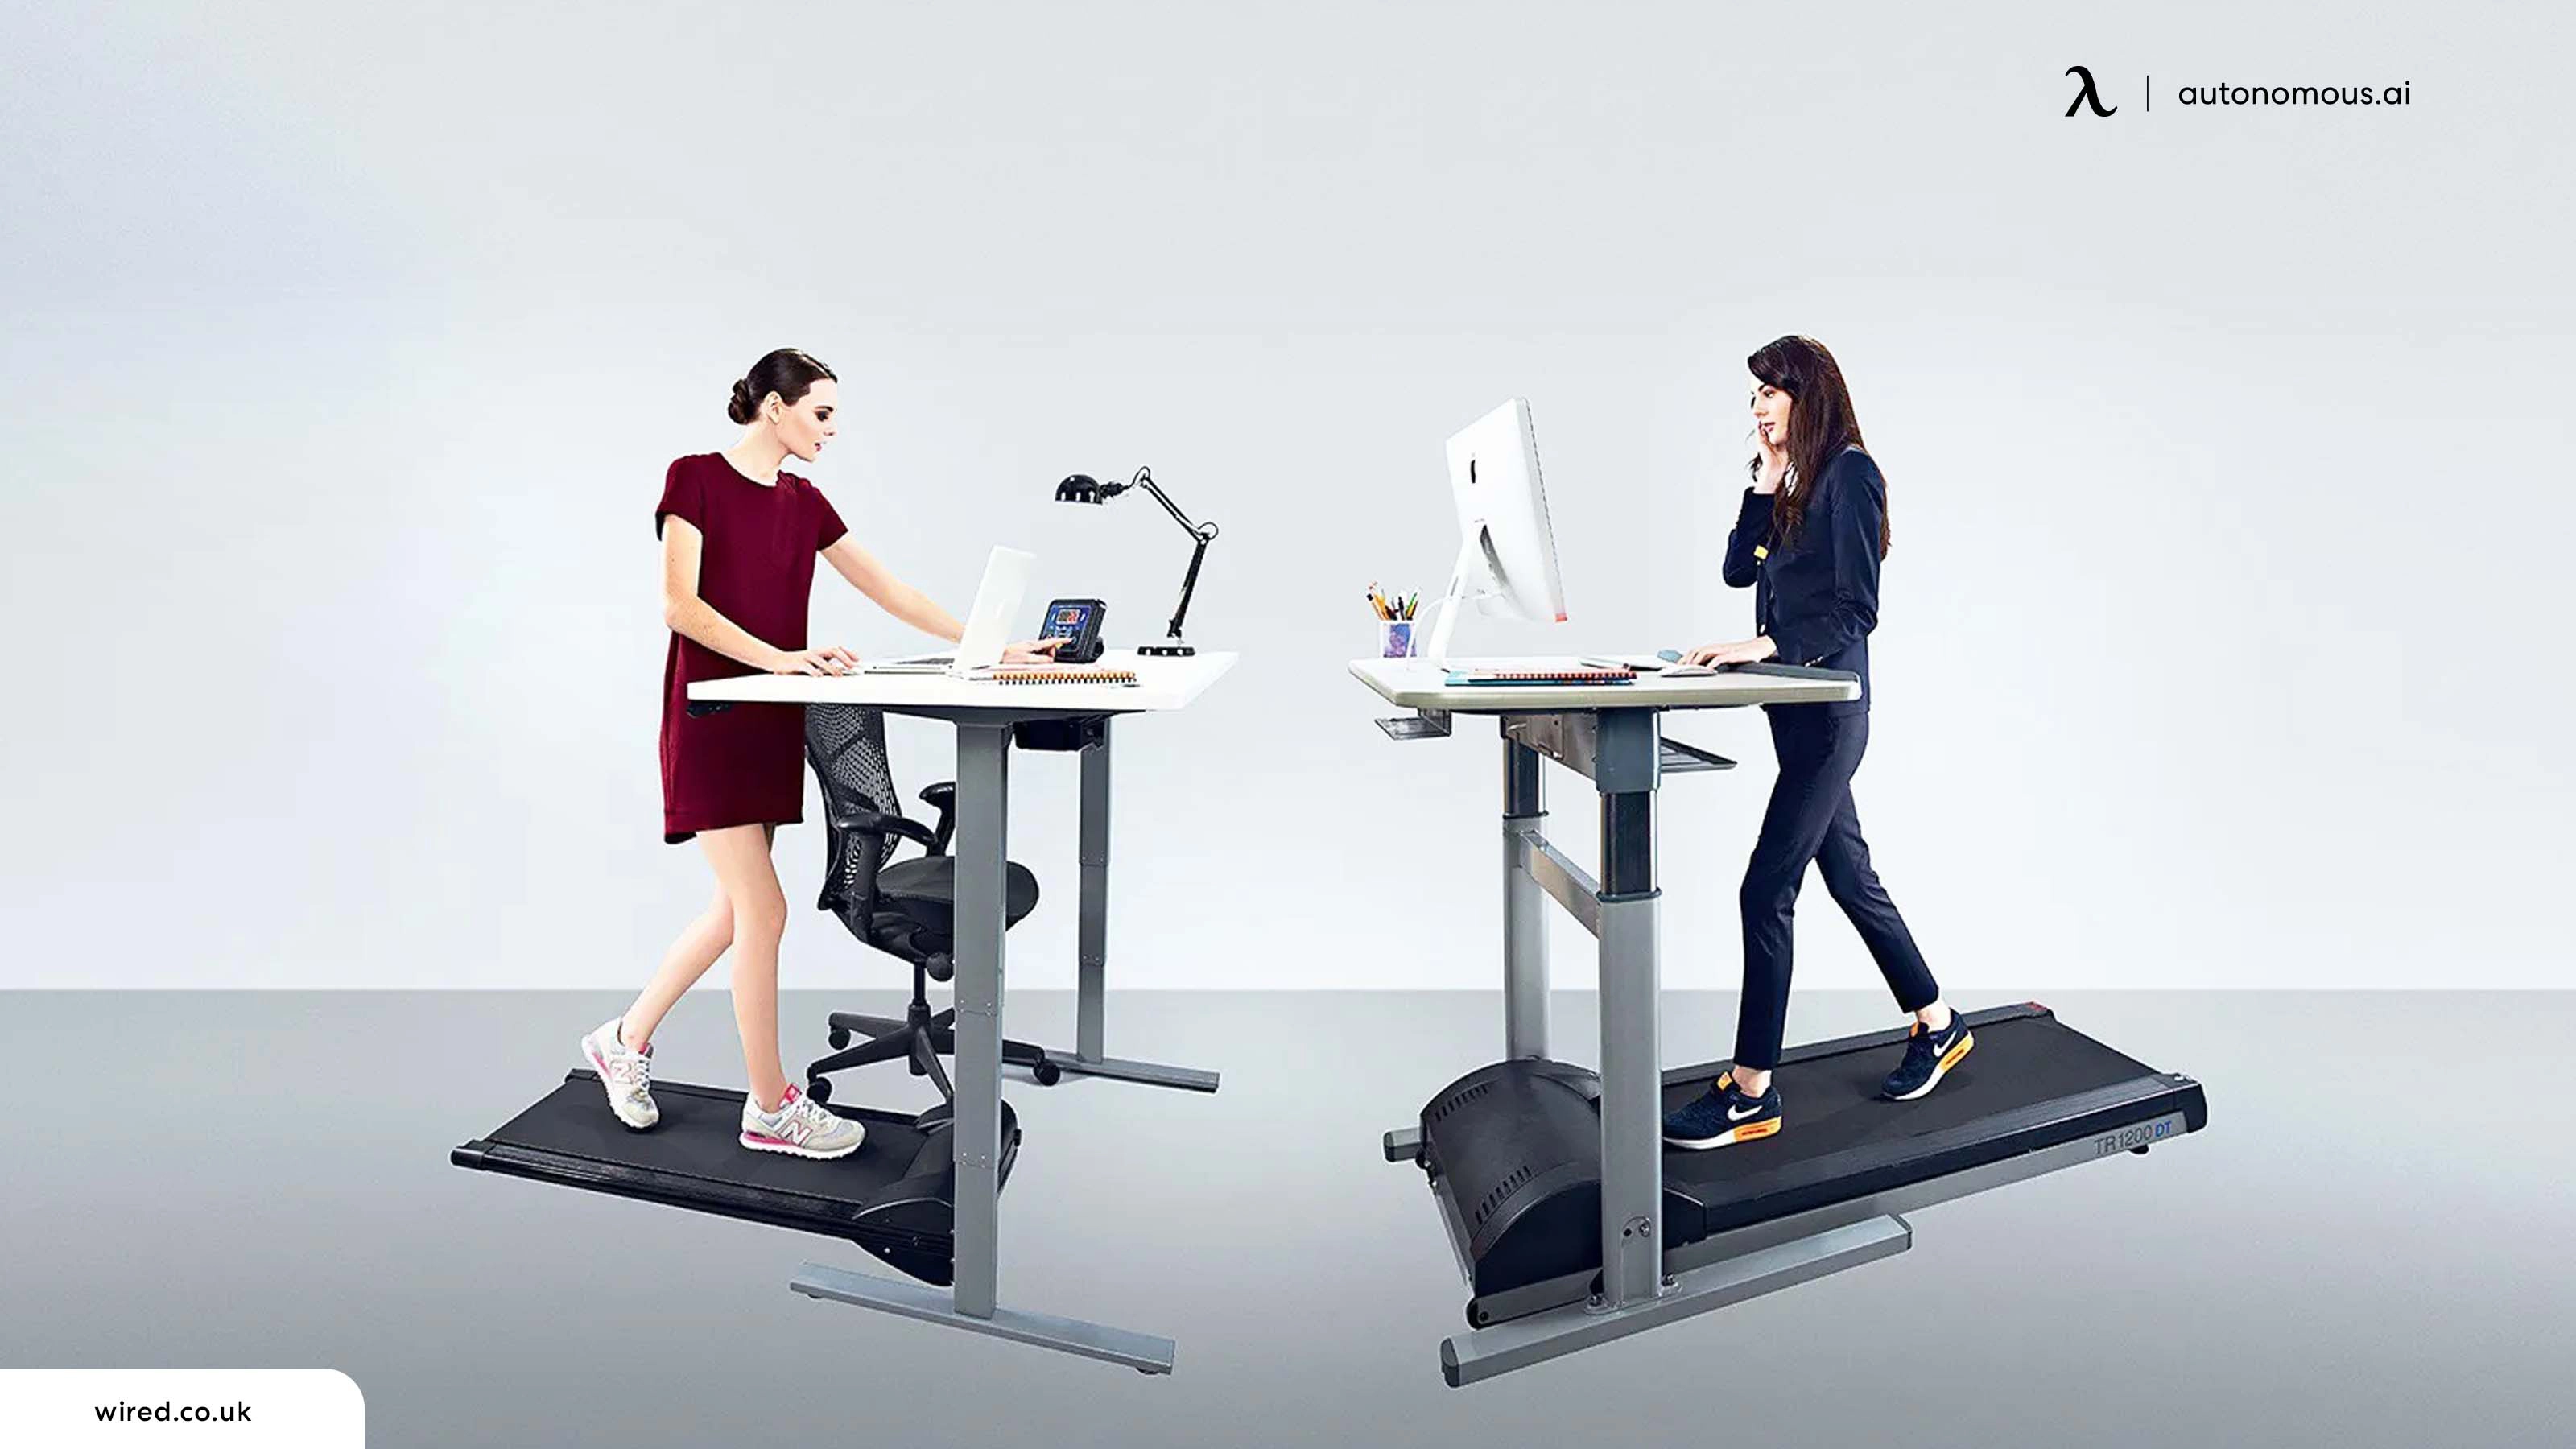 Walking Desk Benefits – How Does a Walking Desk Boost Your Productivity?